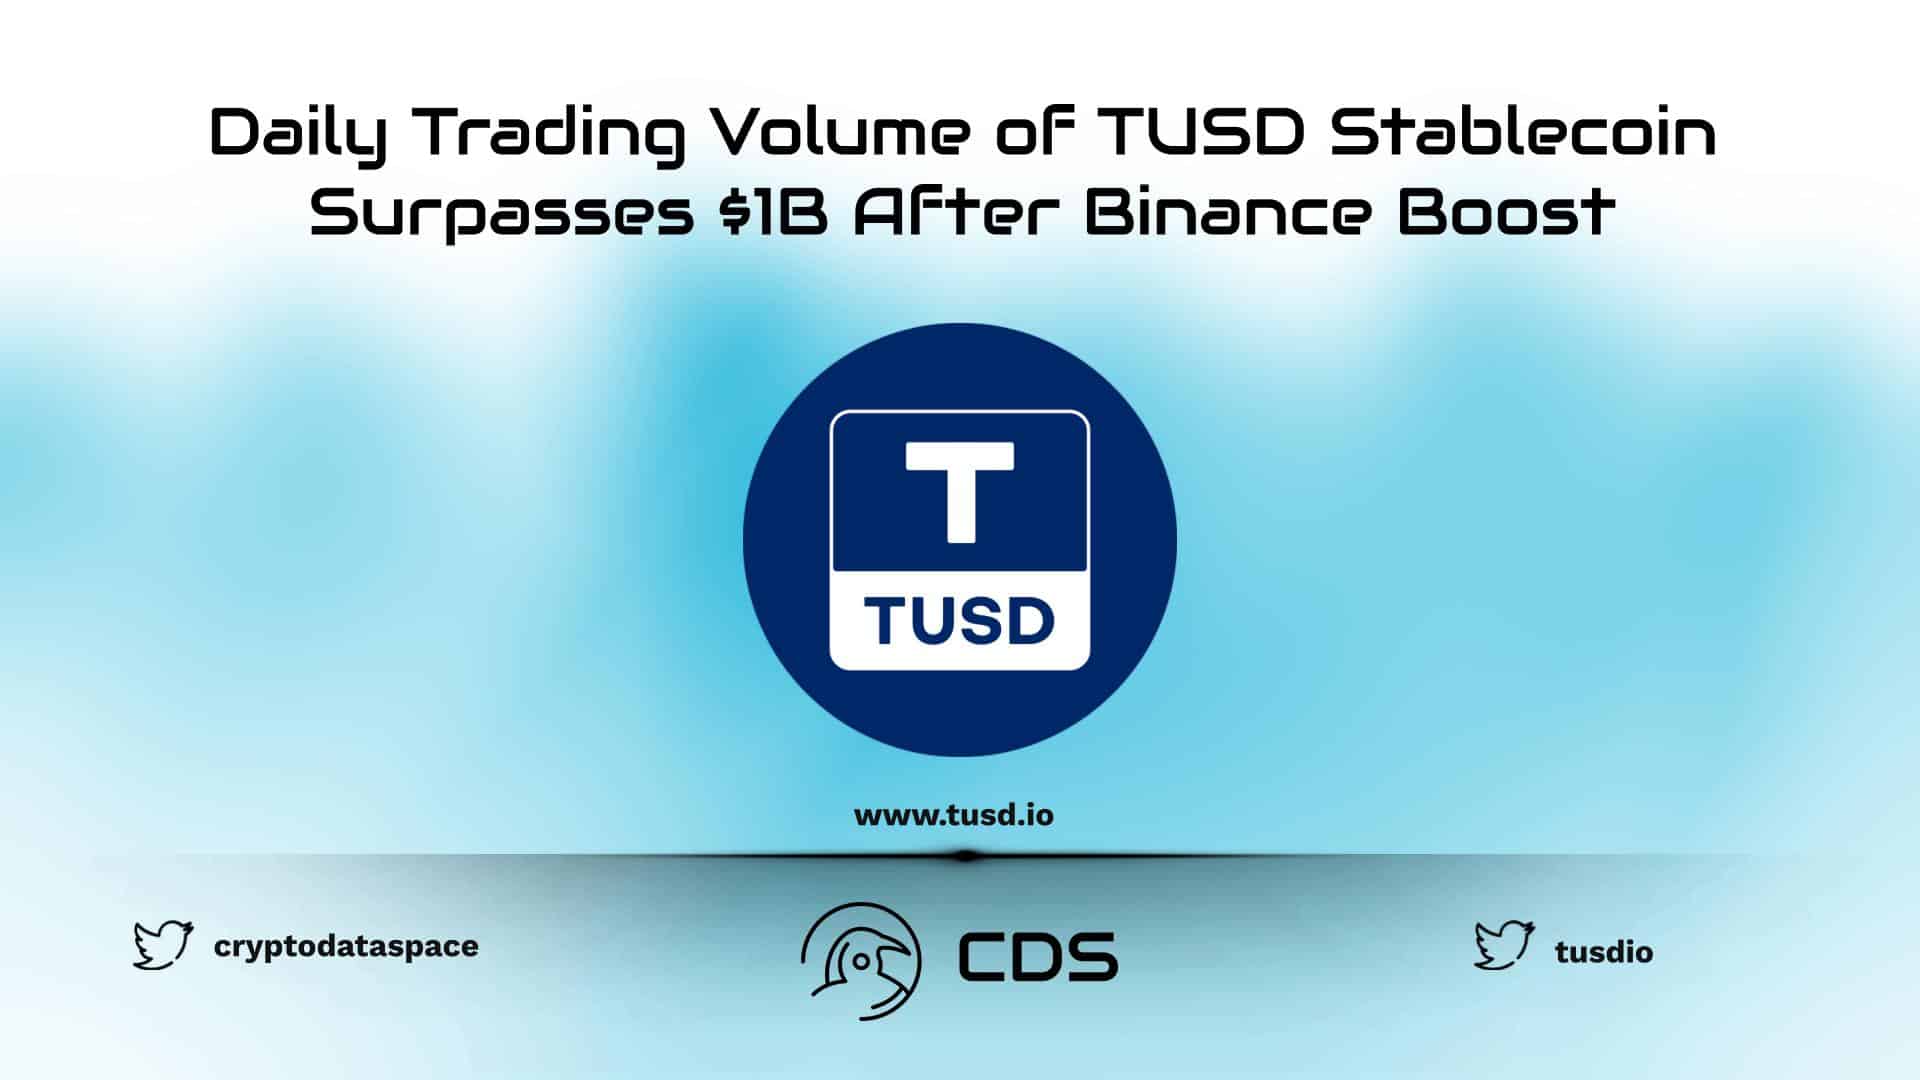 Daily Trading Volume of TUSD Stablecoin Surpasses $1B After Binance Boost